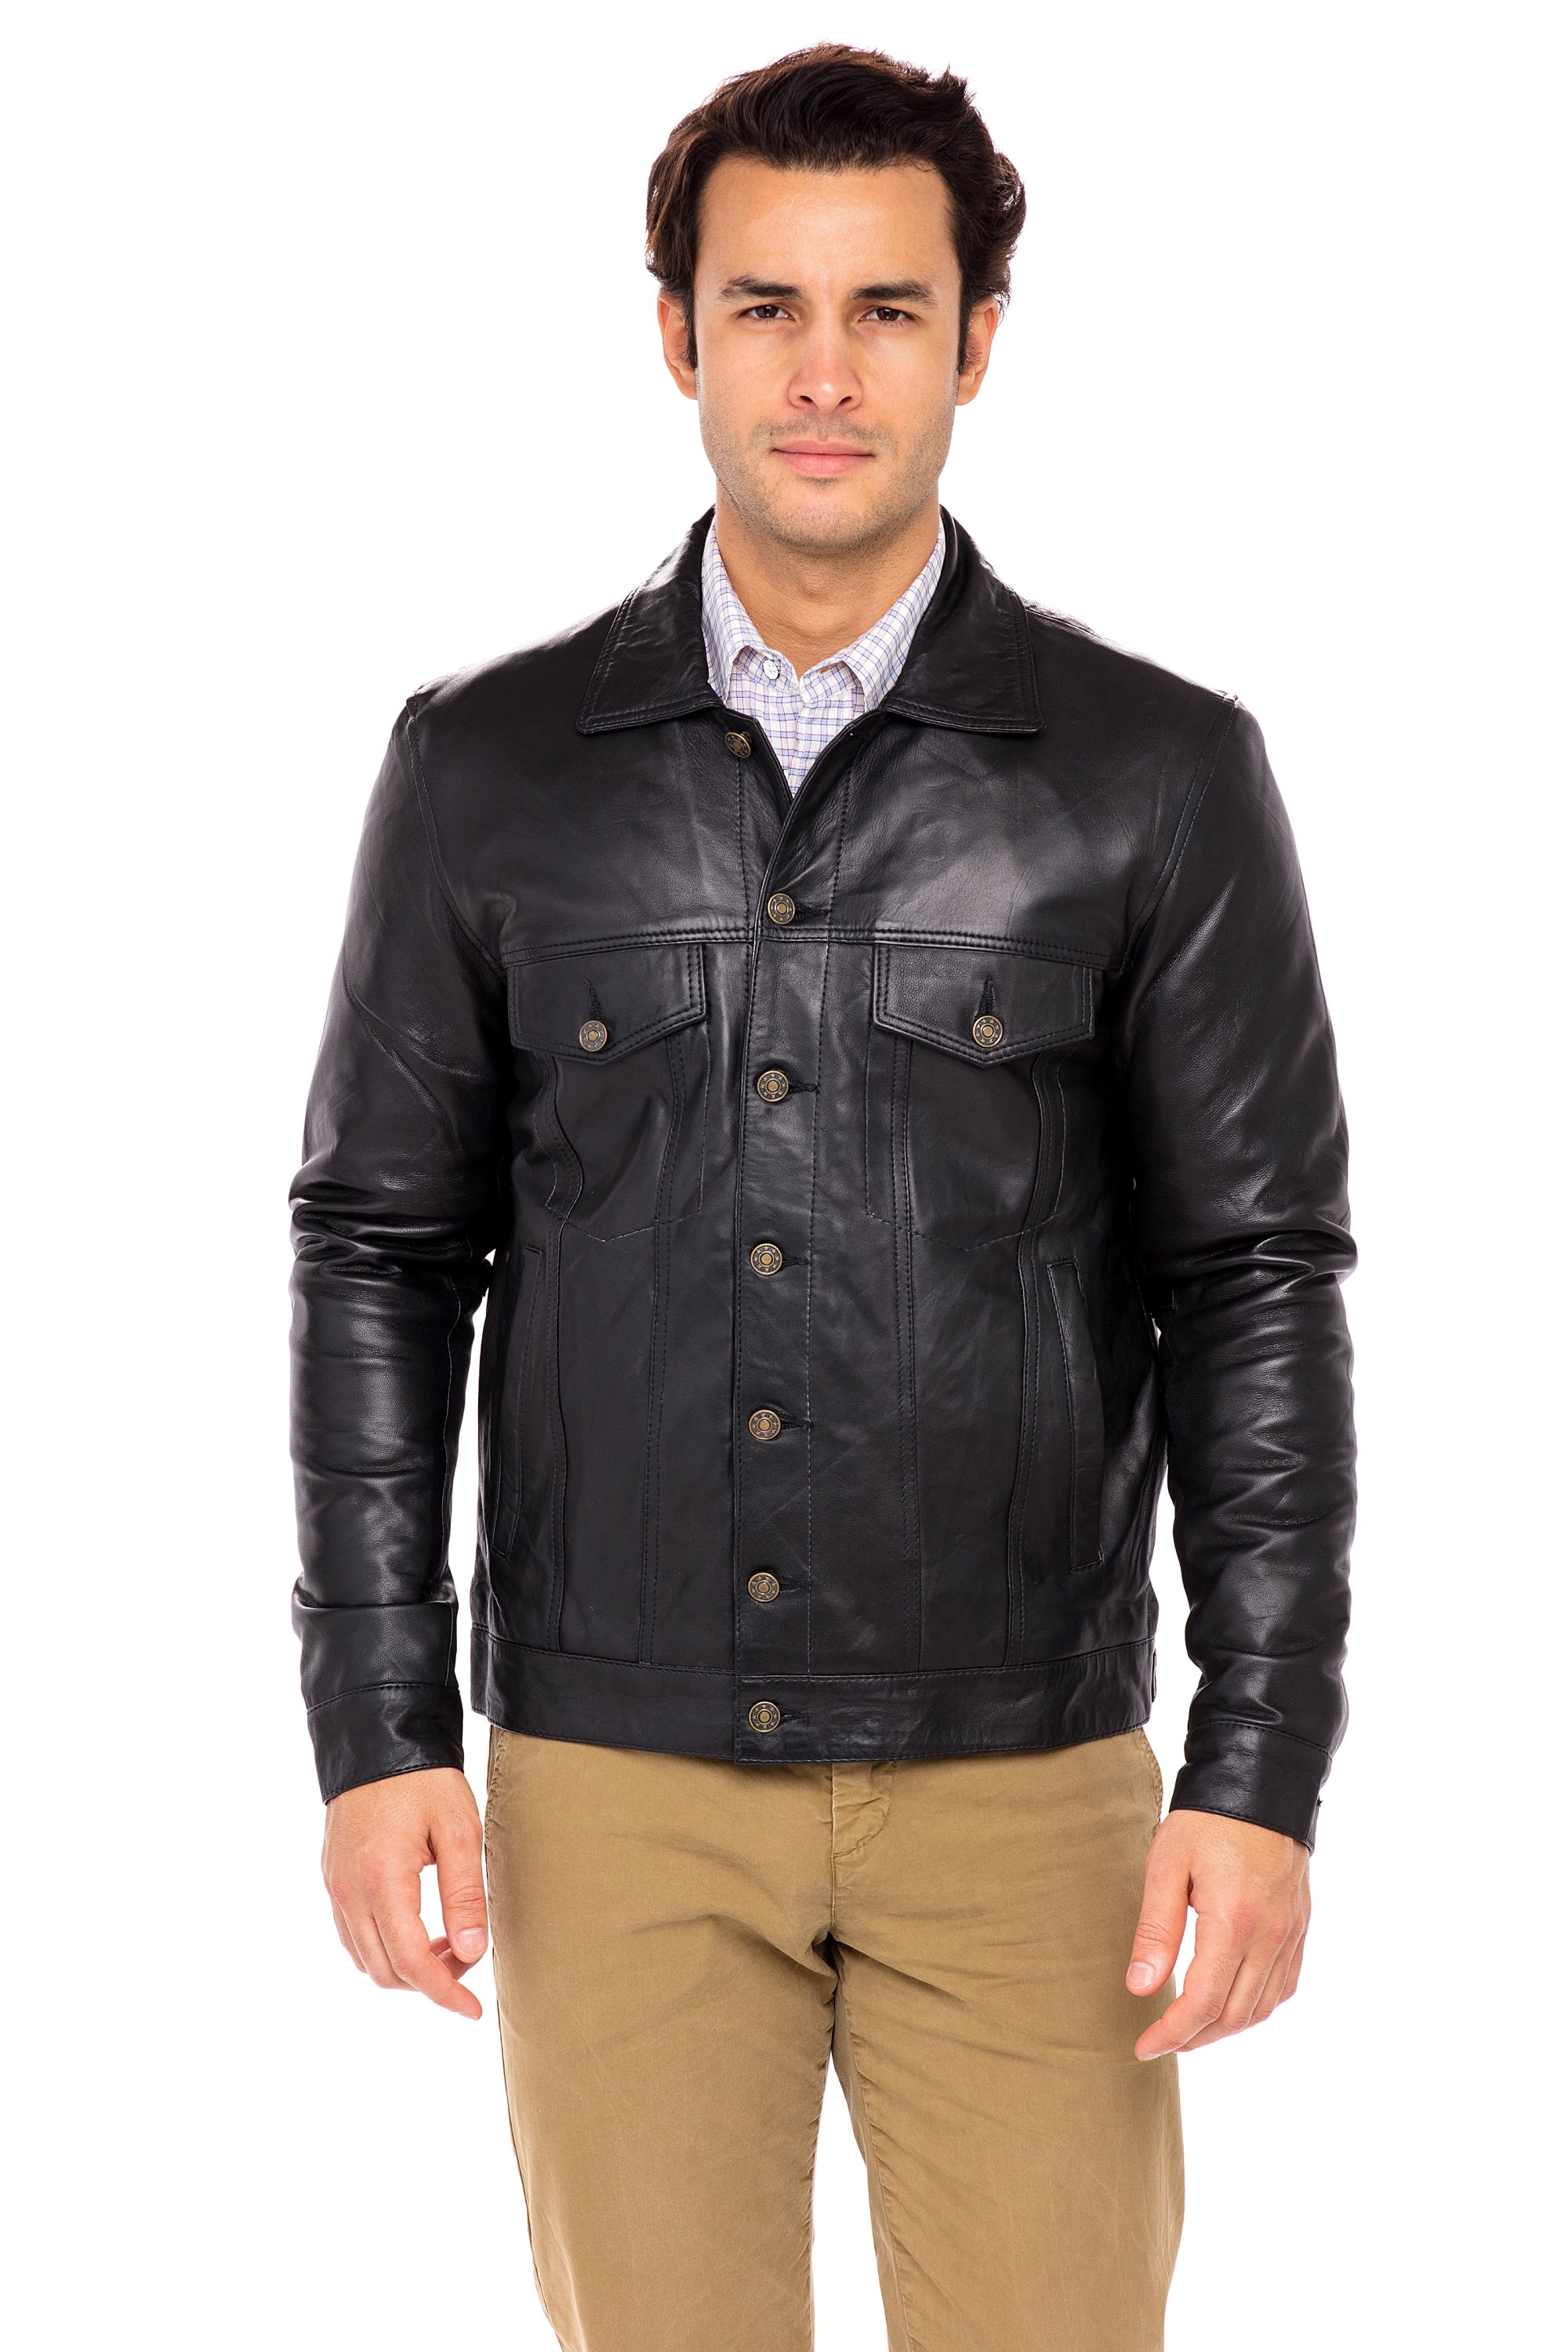 MAN BLACK CASUAL UP STYLE TRUCKER REAL SOFT NAPPA LEATHER JACKETS 